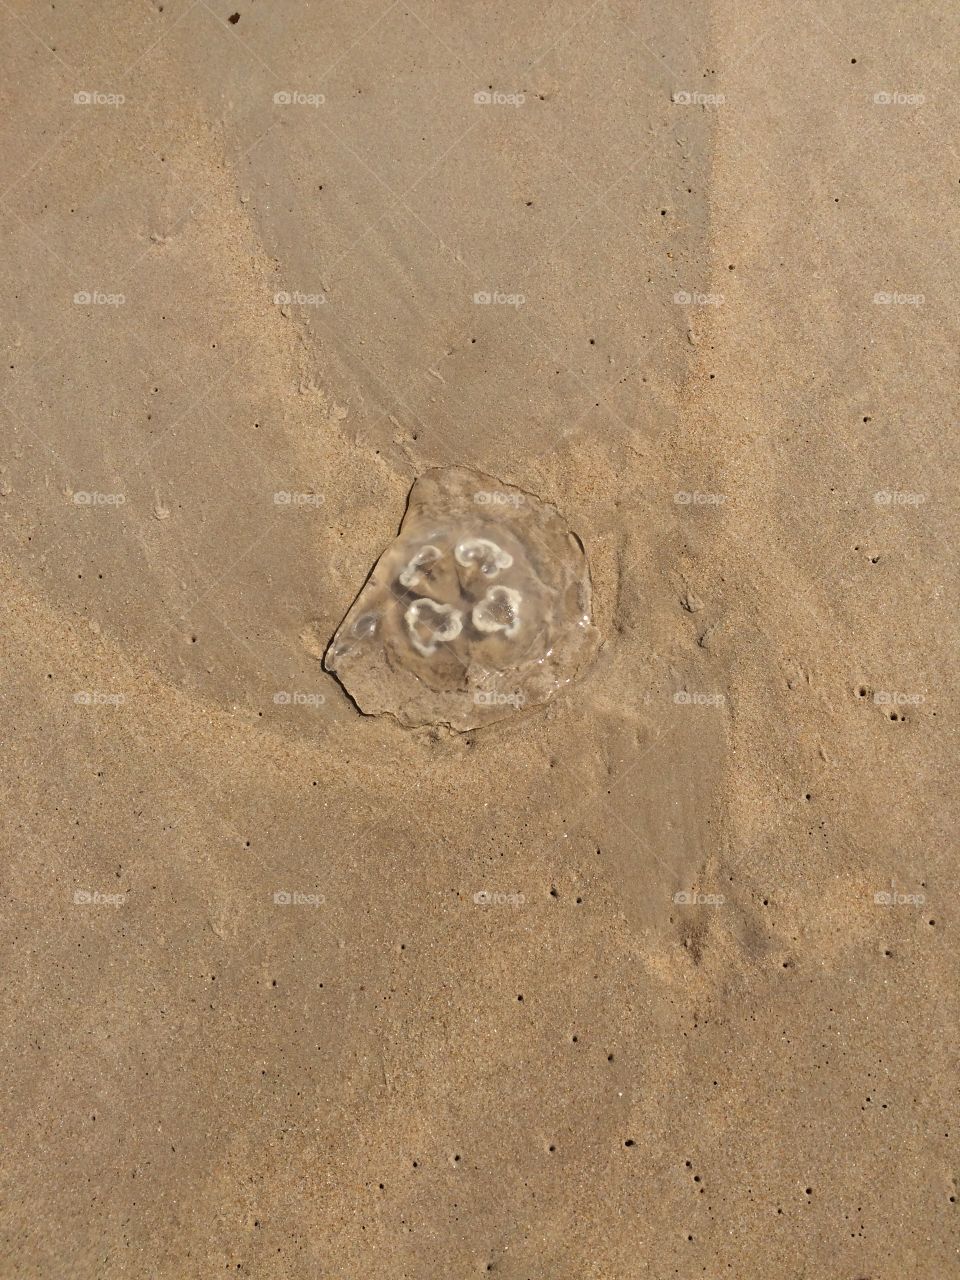 Jelly fish at the beach 